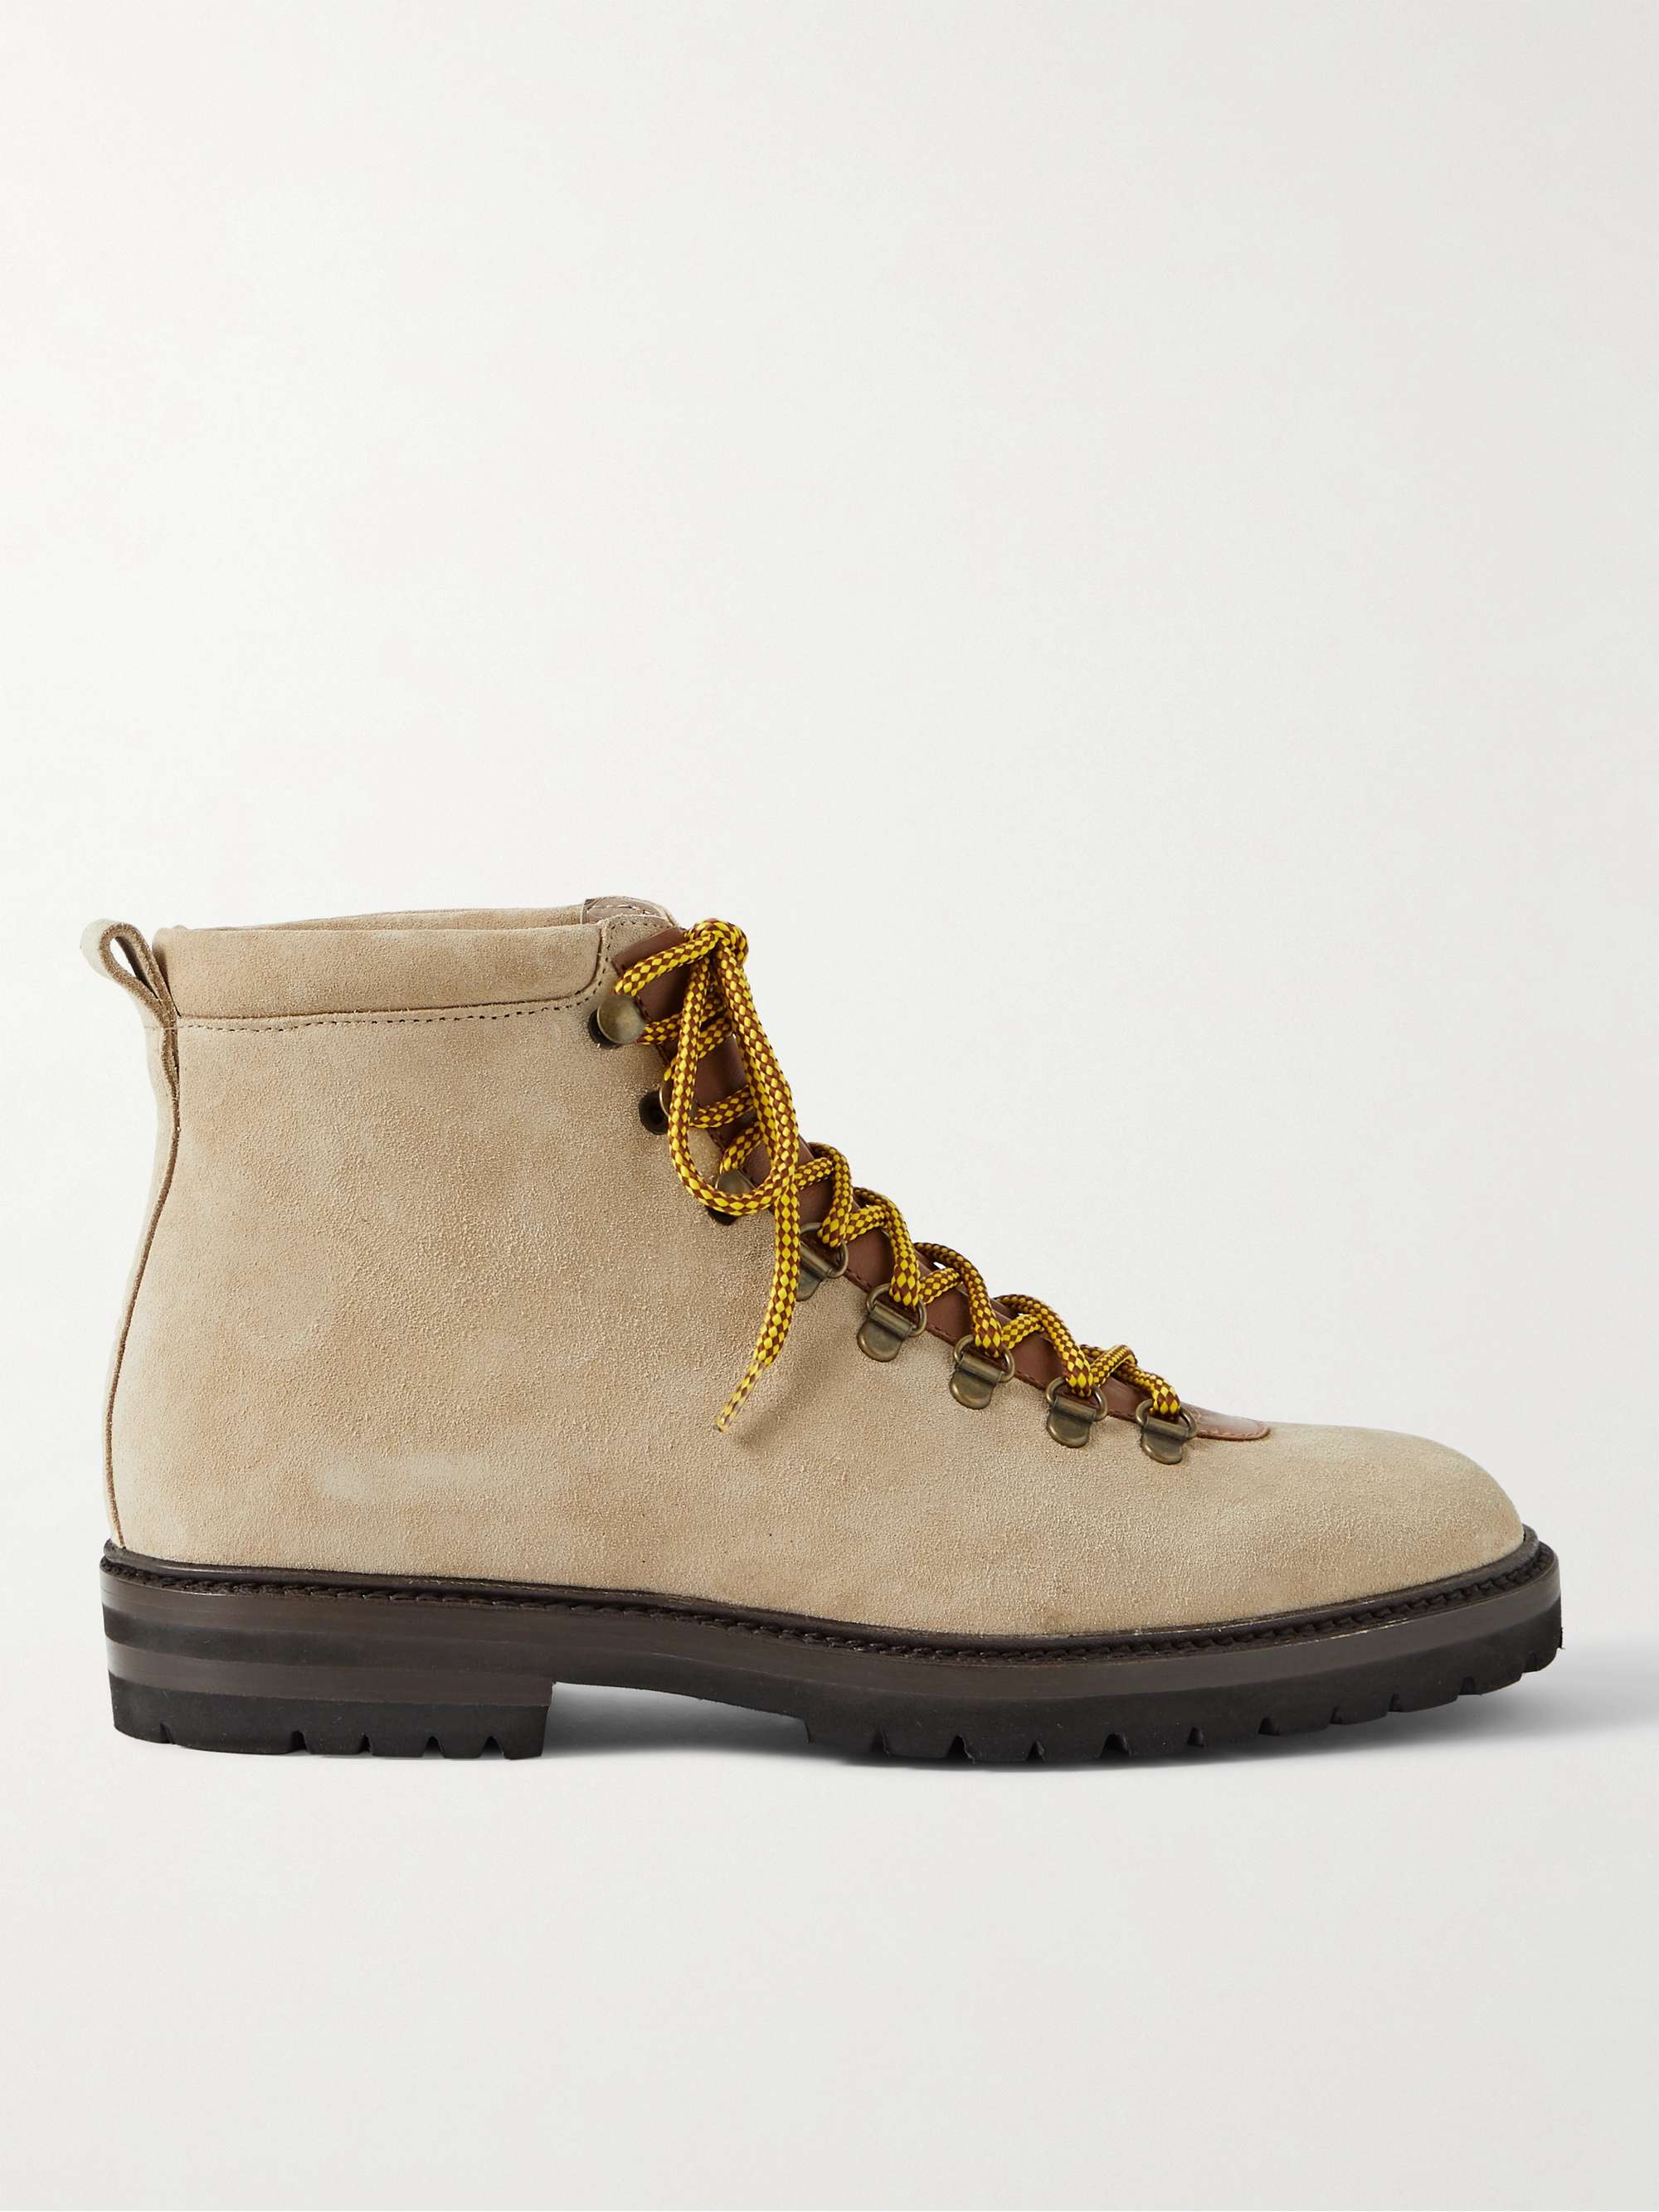 MANOLO BLAHNIK Calaurio Leather-Trimmed Suede Hiking Boots for Men | MR  PORTER